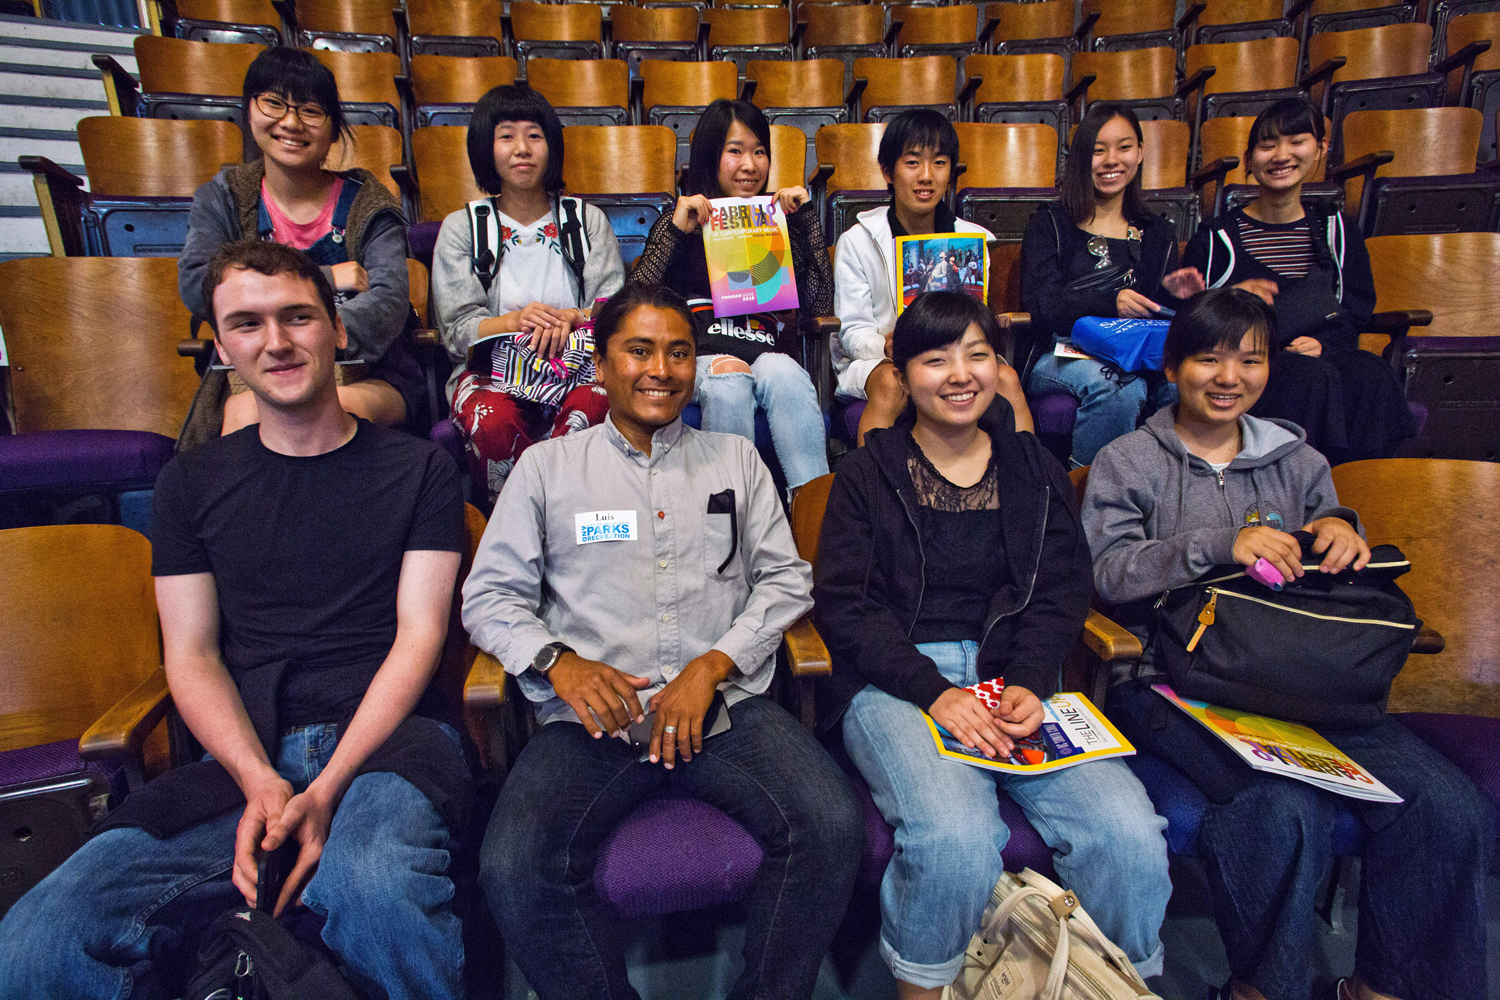 A delegation from Santa Cruz' sister city in Japan dropped in at an open rehearsal and loved it!